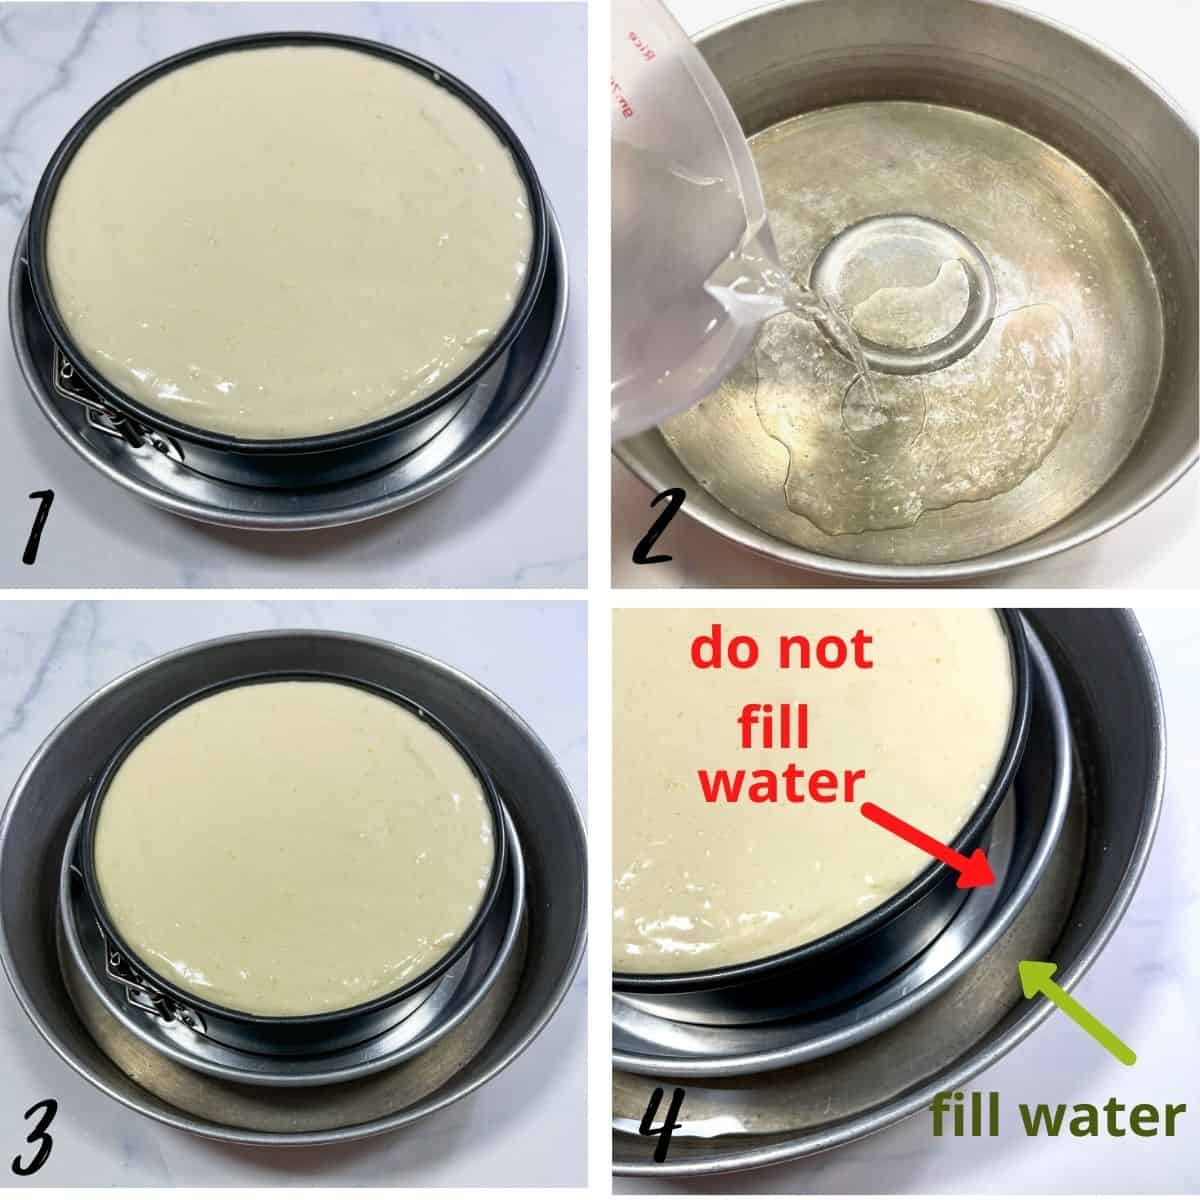 A poster of 4 images showing how to make a cake in a water bath